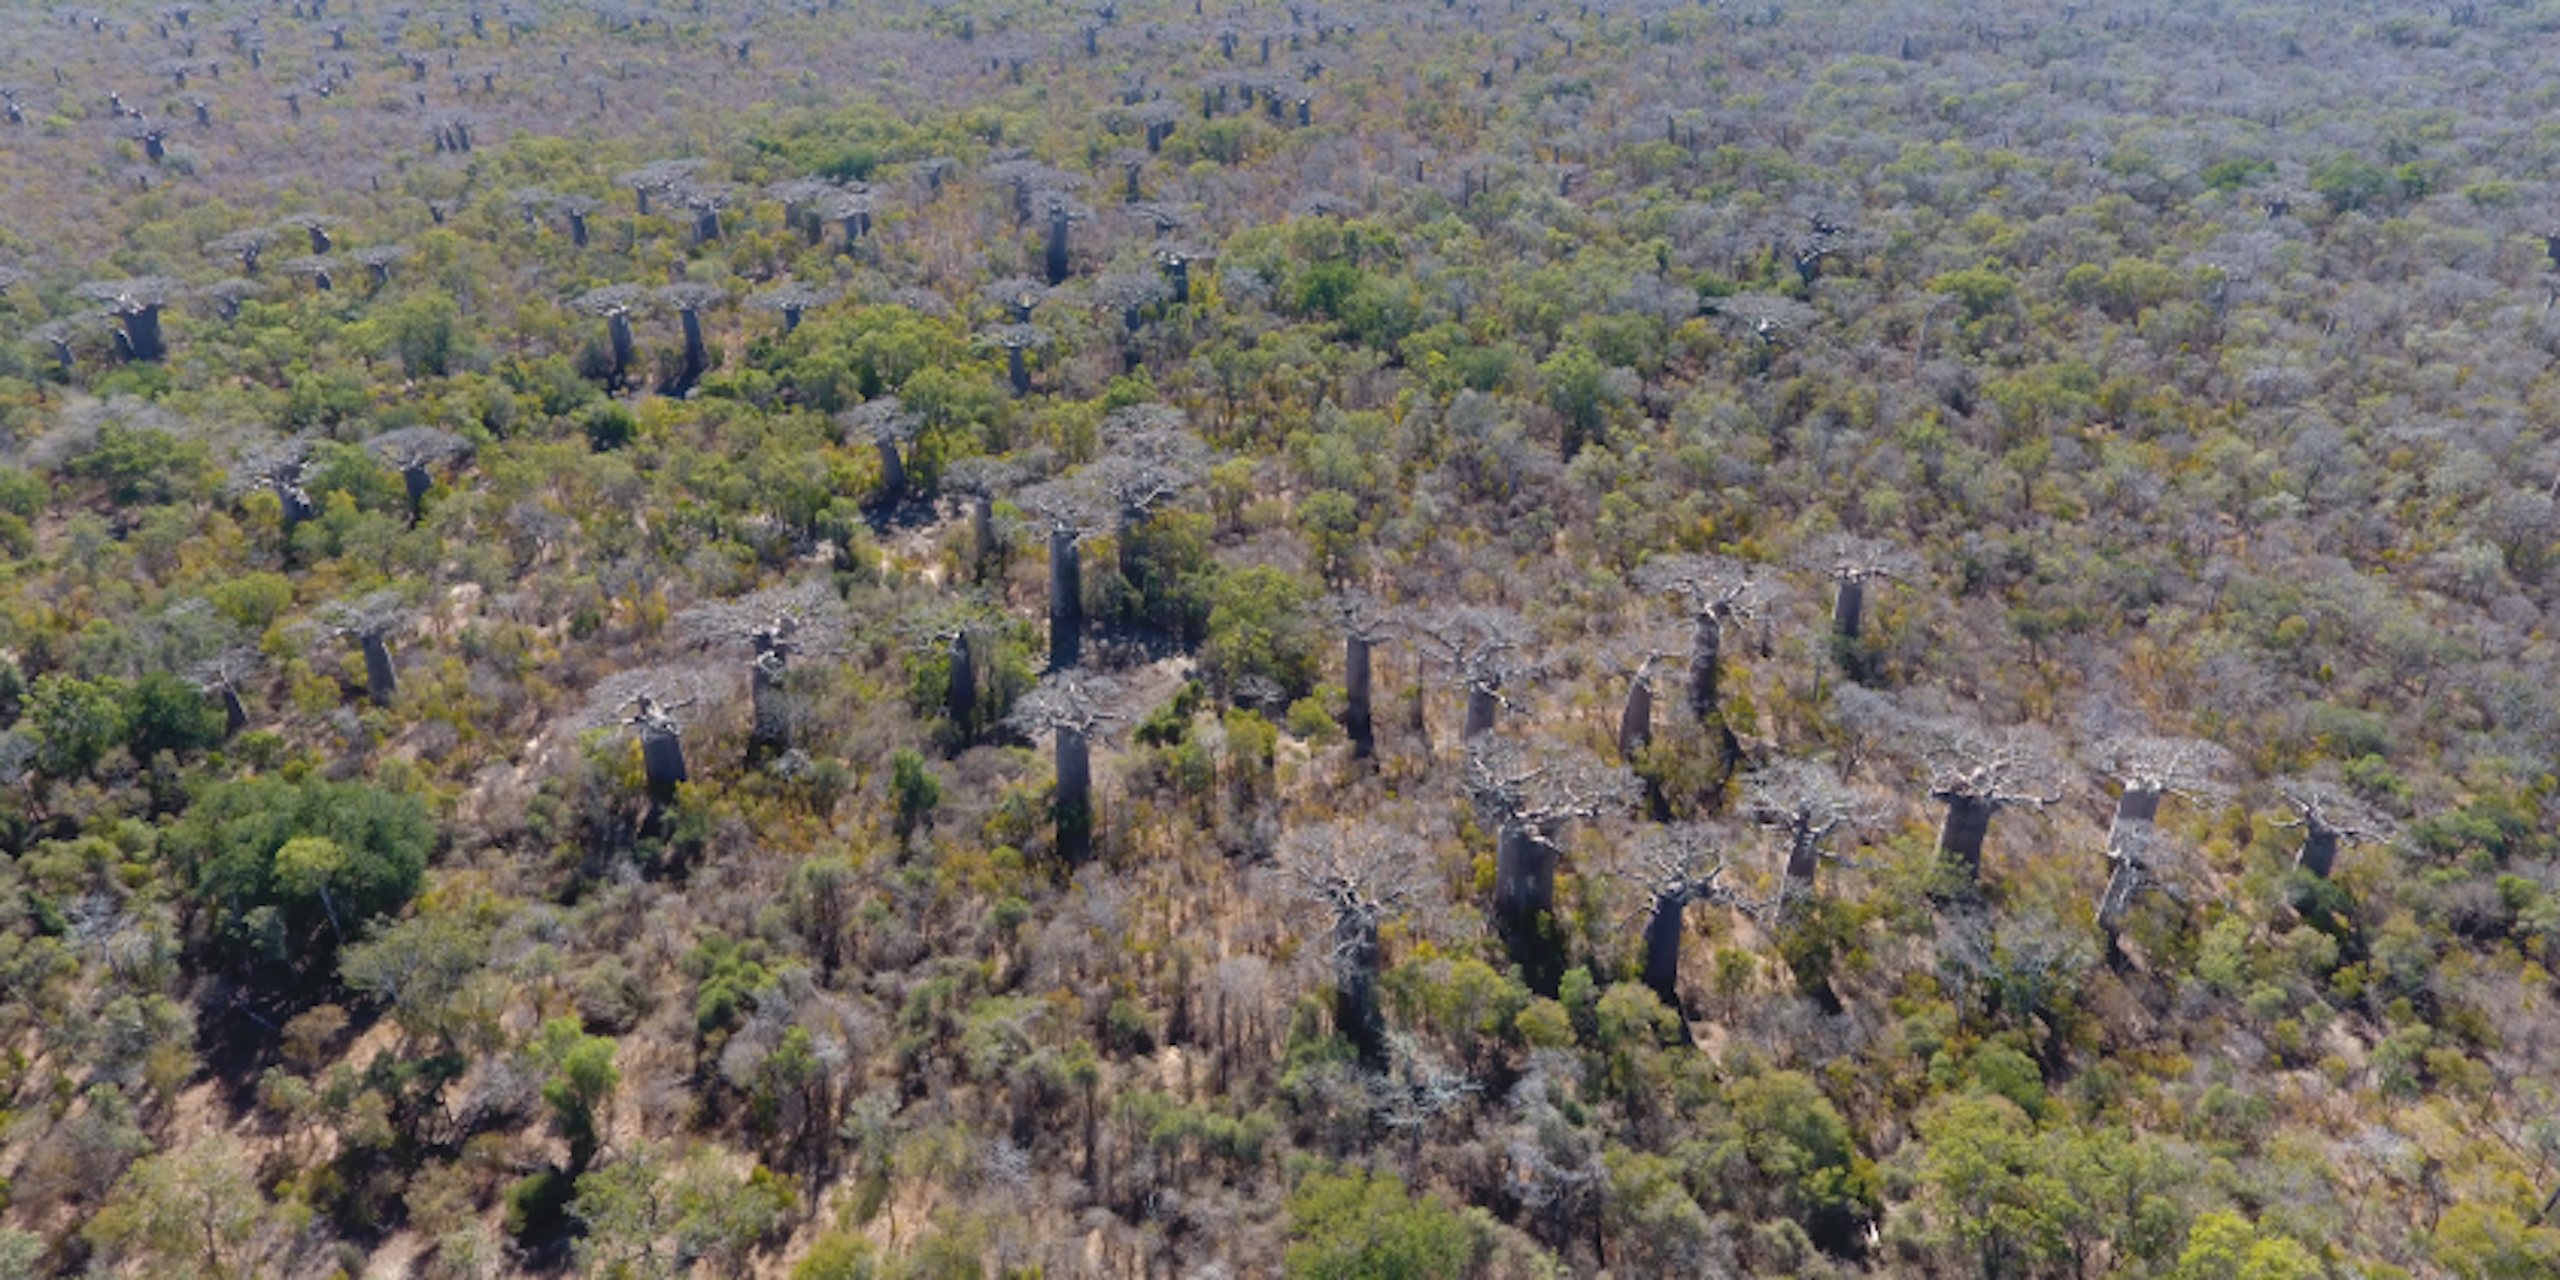 A slightly dry area is photographed from above - bushes and dozens of tall baobab trees are dotted throughout the landscape.